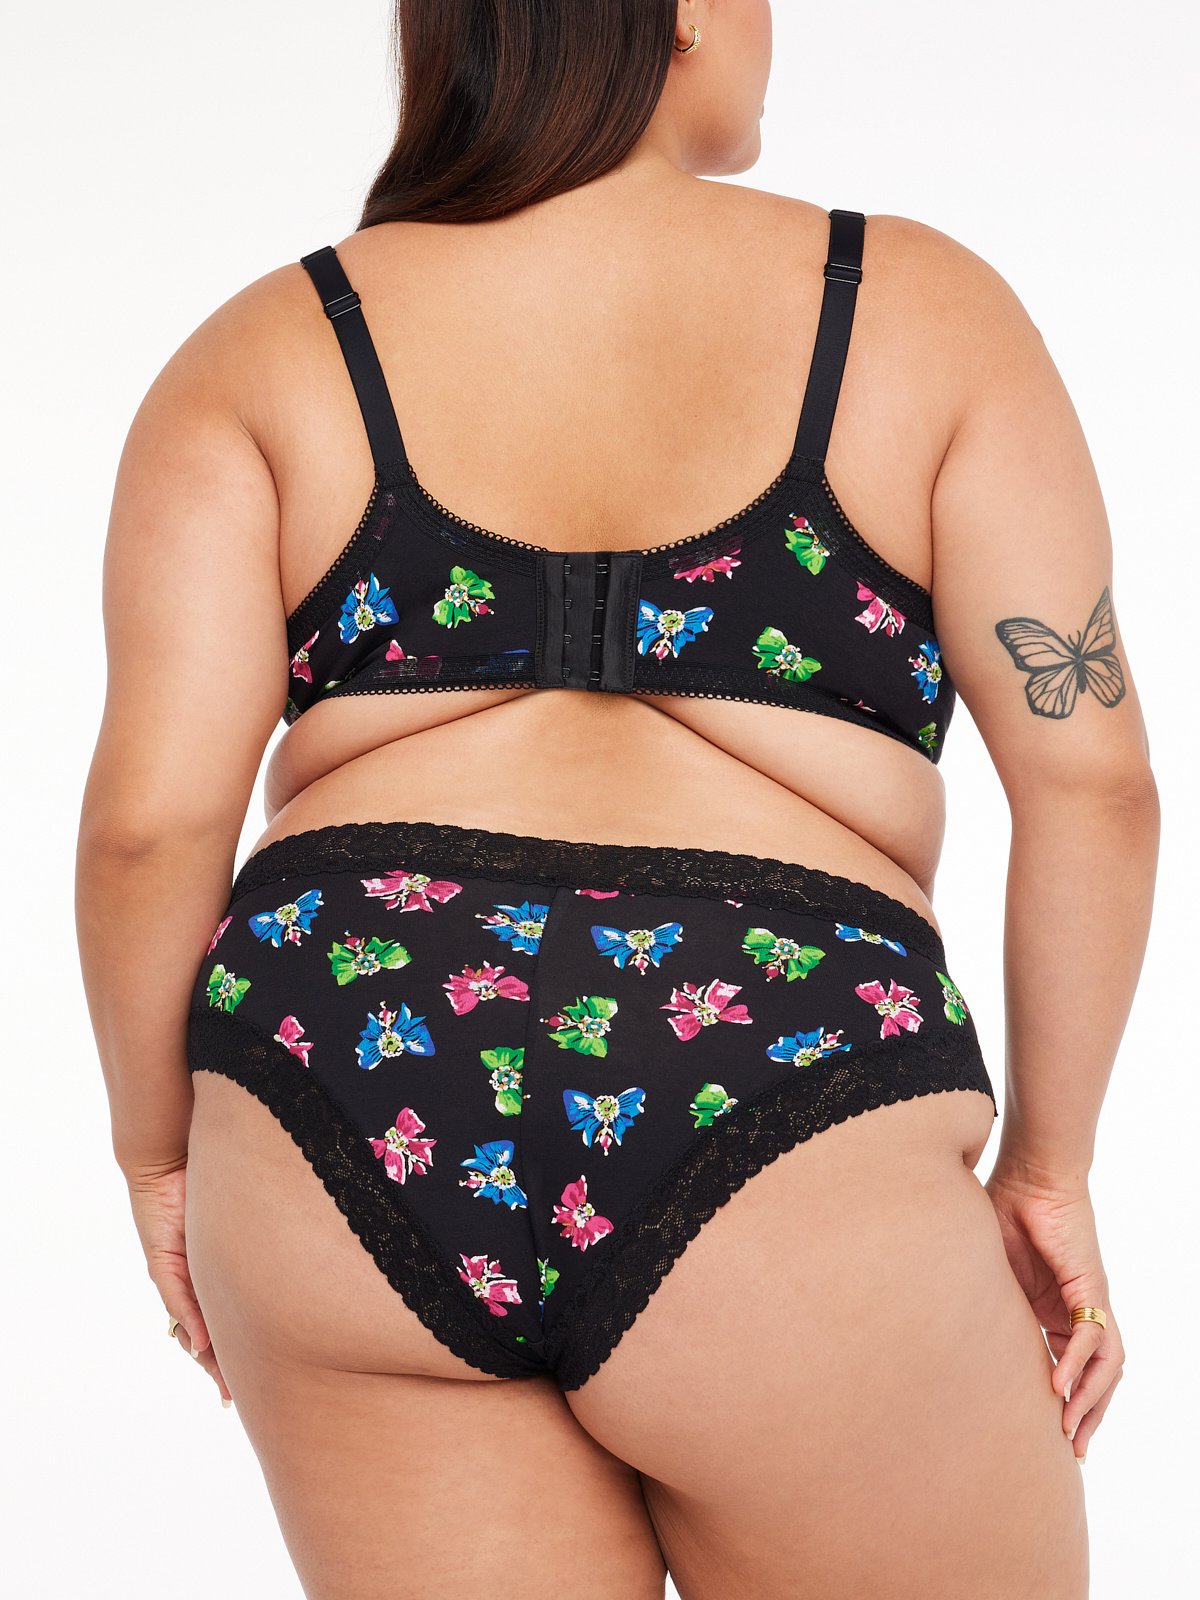 Cotton Essentials Lace-Trim Cheeky Knickers in Black & Multi